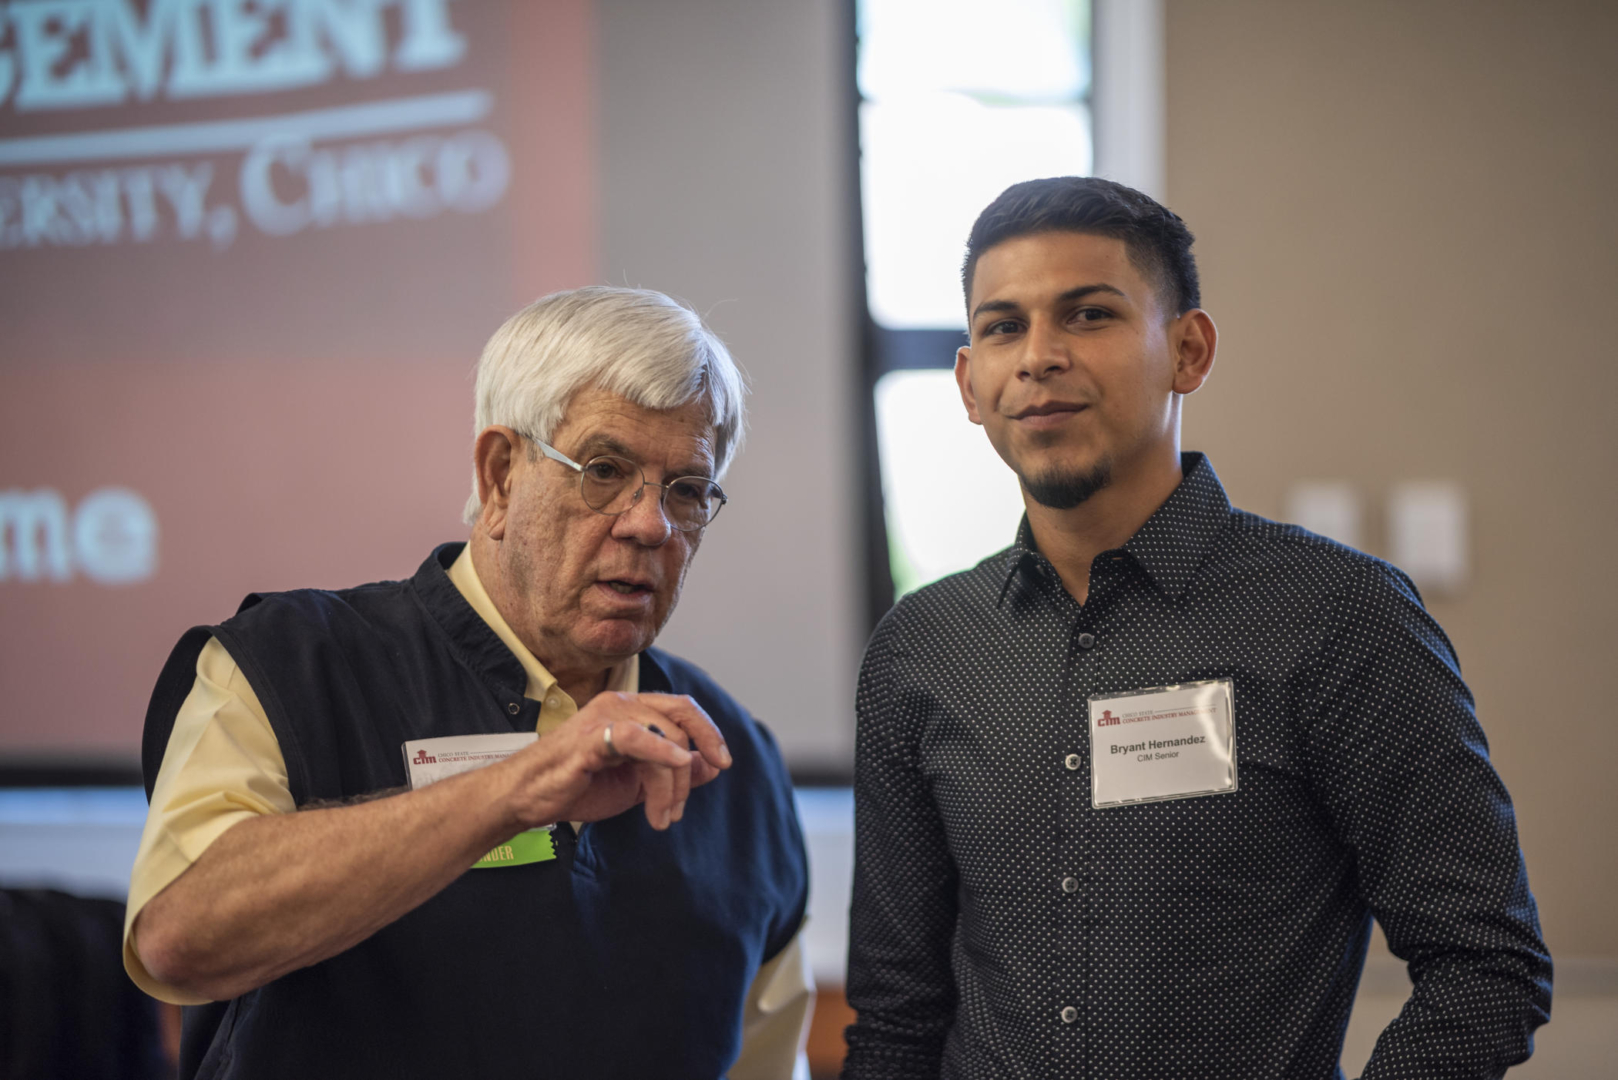 Doug Guerrero talks with a student at a CIM Patrons luncheon.